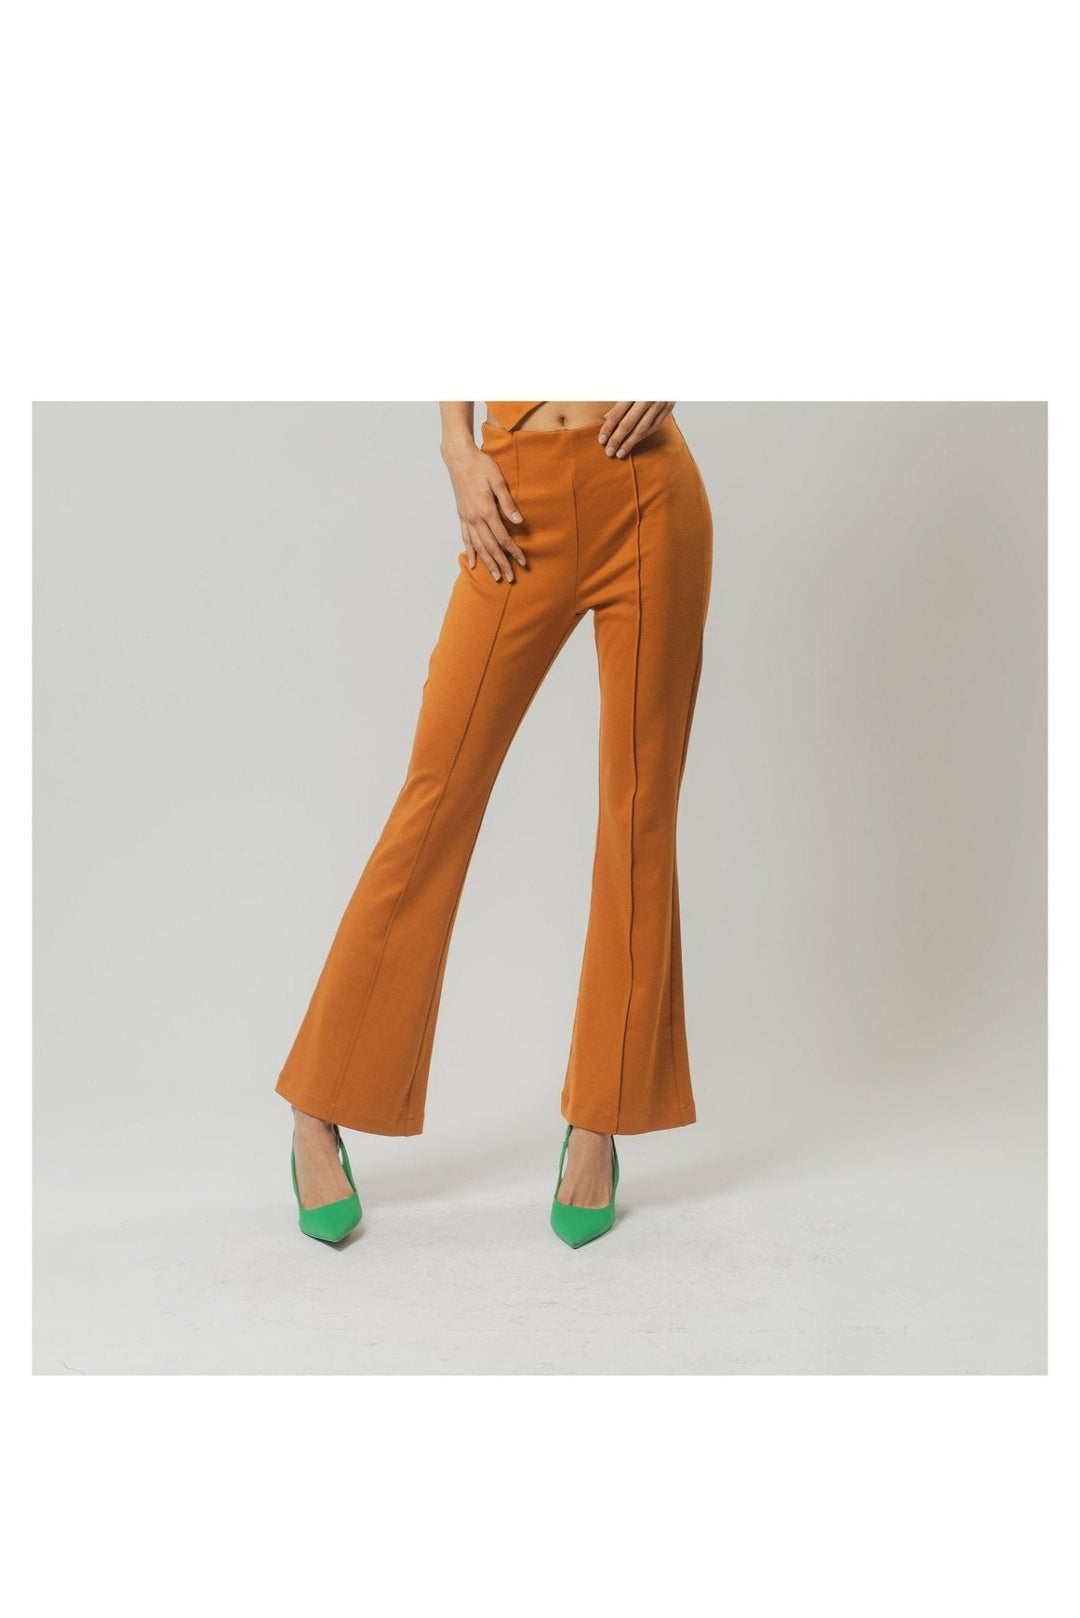 Cut and Sew Mustard pants Nolabels.in